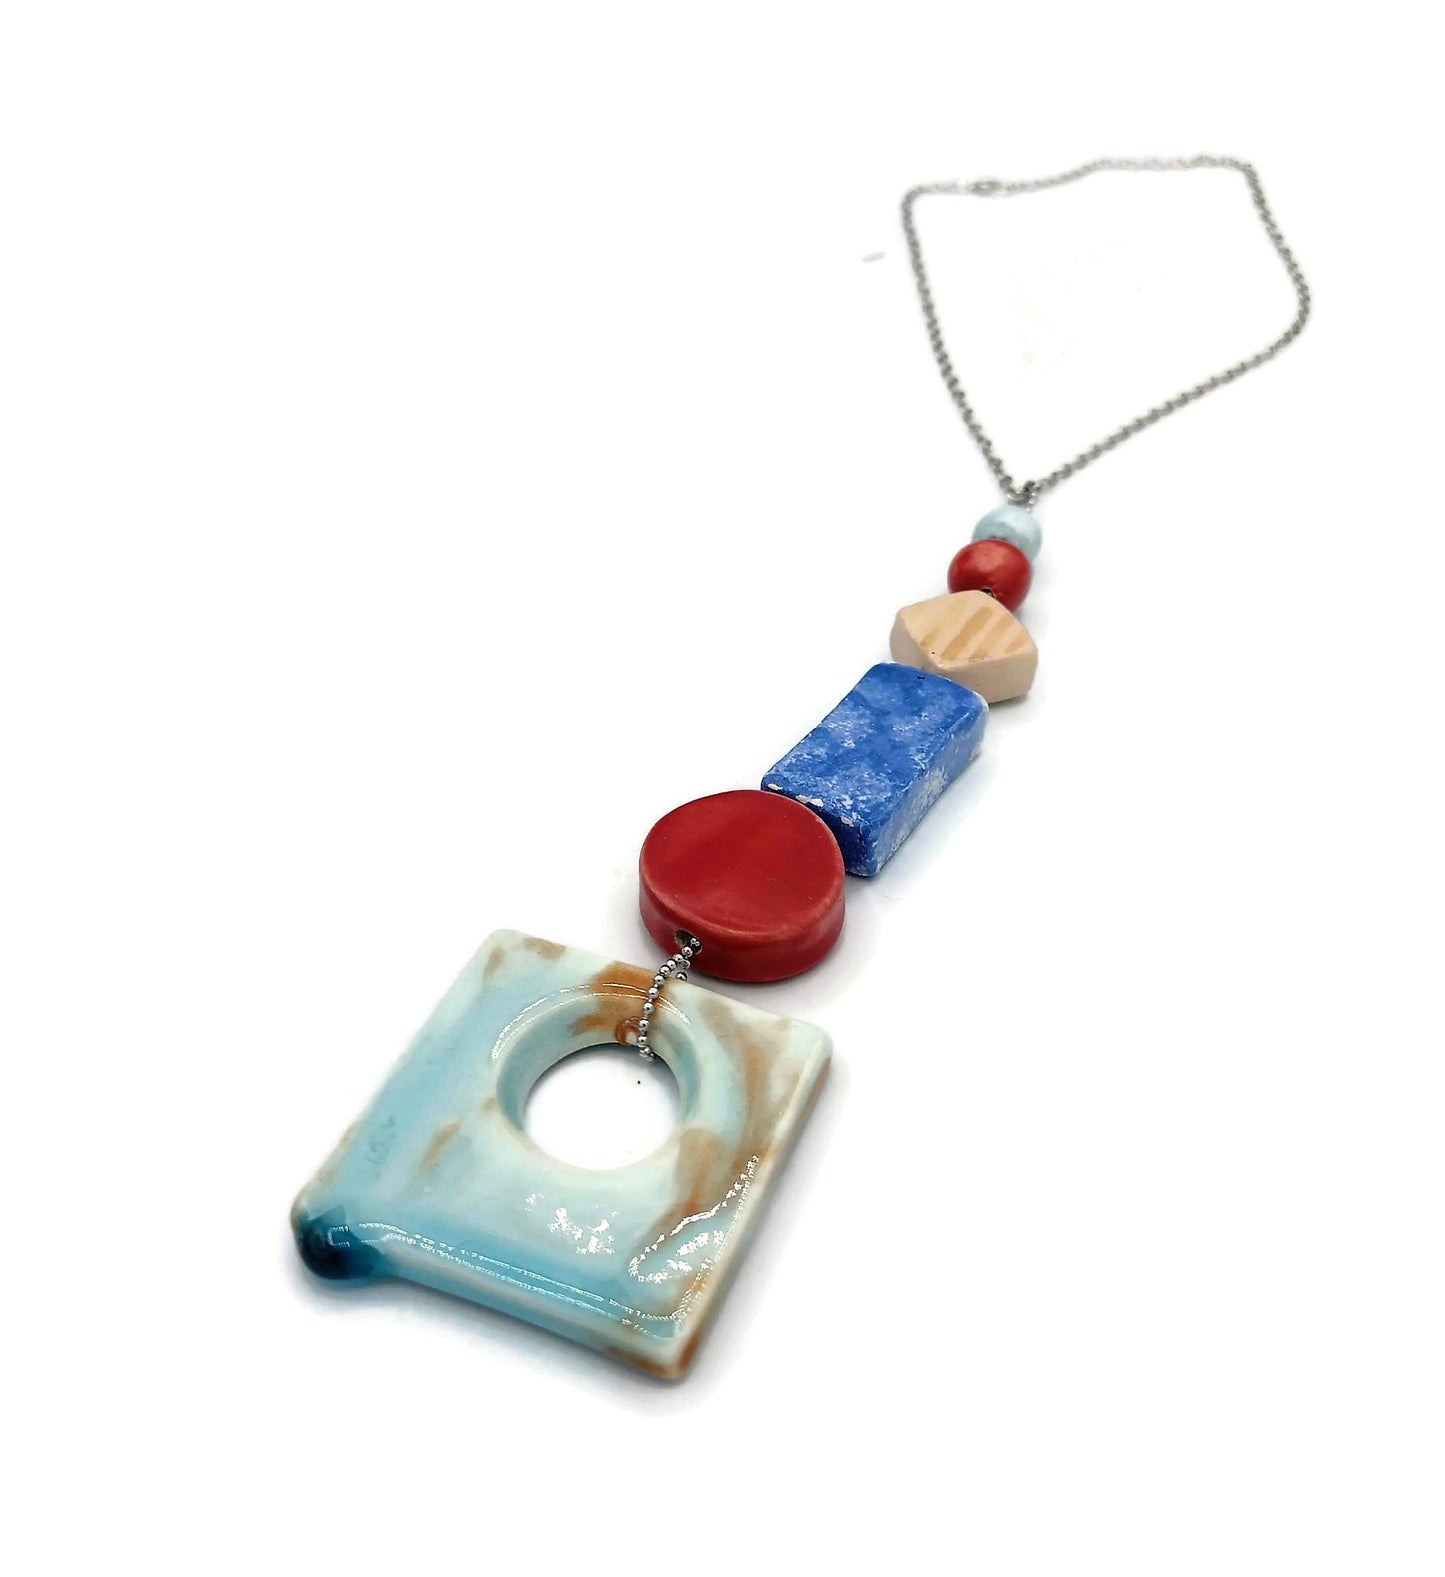 Trendy Statement Necklace Pendant For Women, Aesthetic Birthday Gift For Her, Everyday Necklace, Handmade Ceramic Jewelry Gifts For Her - Ceramica Ana Rafael